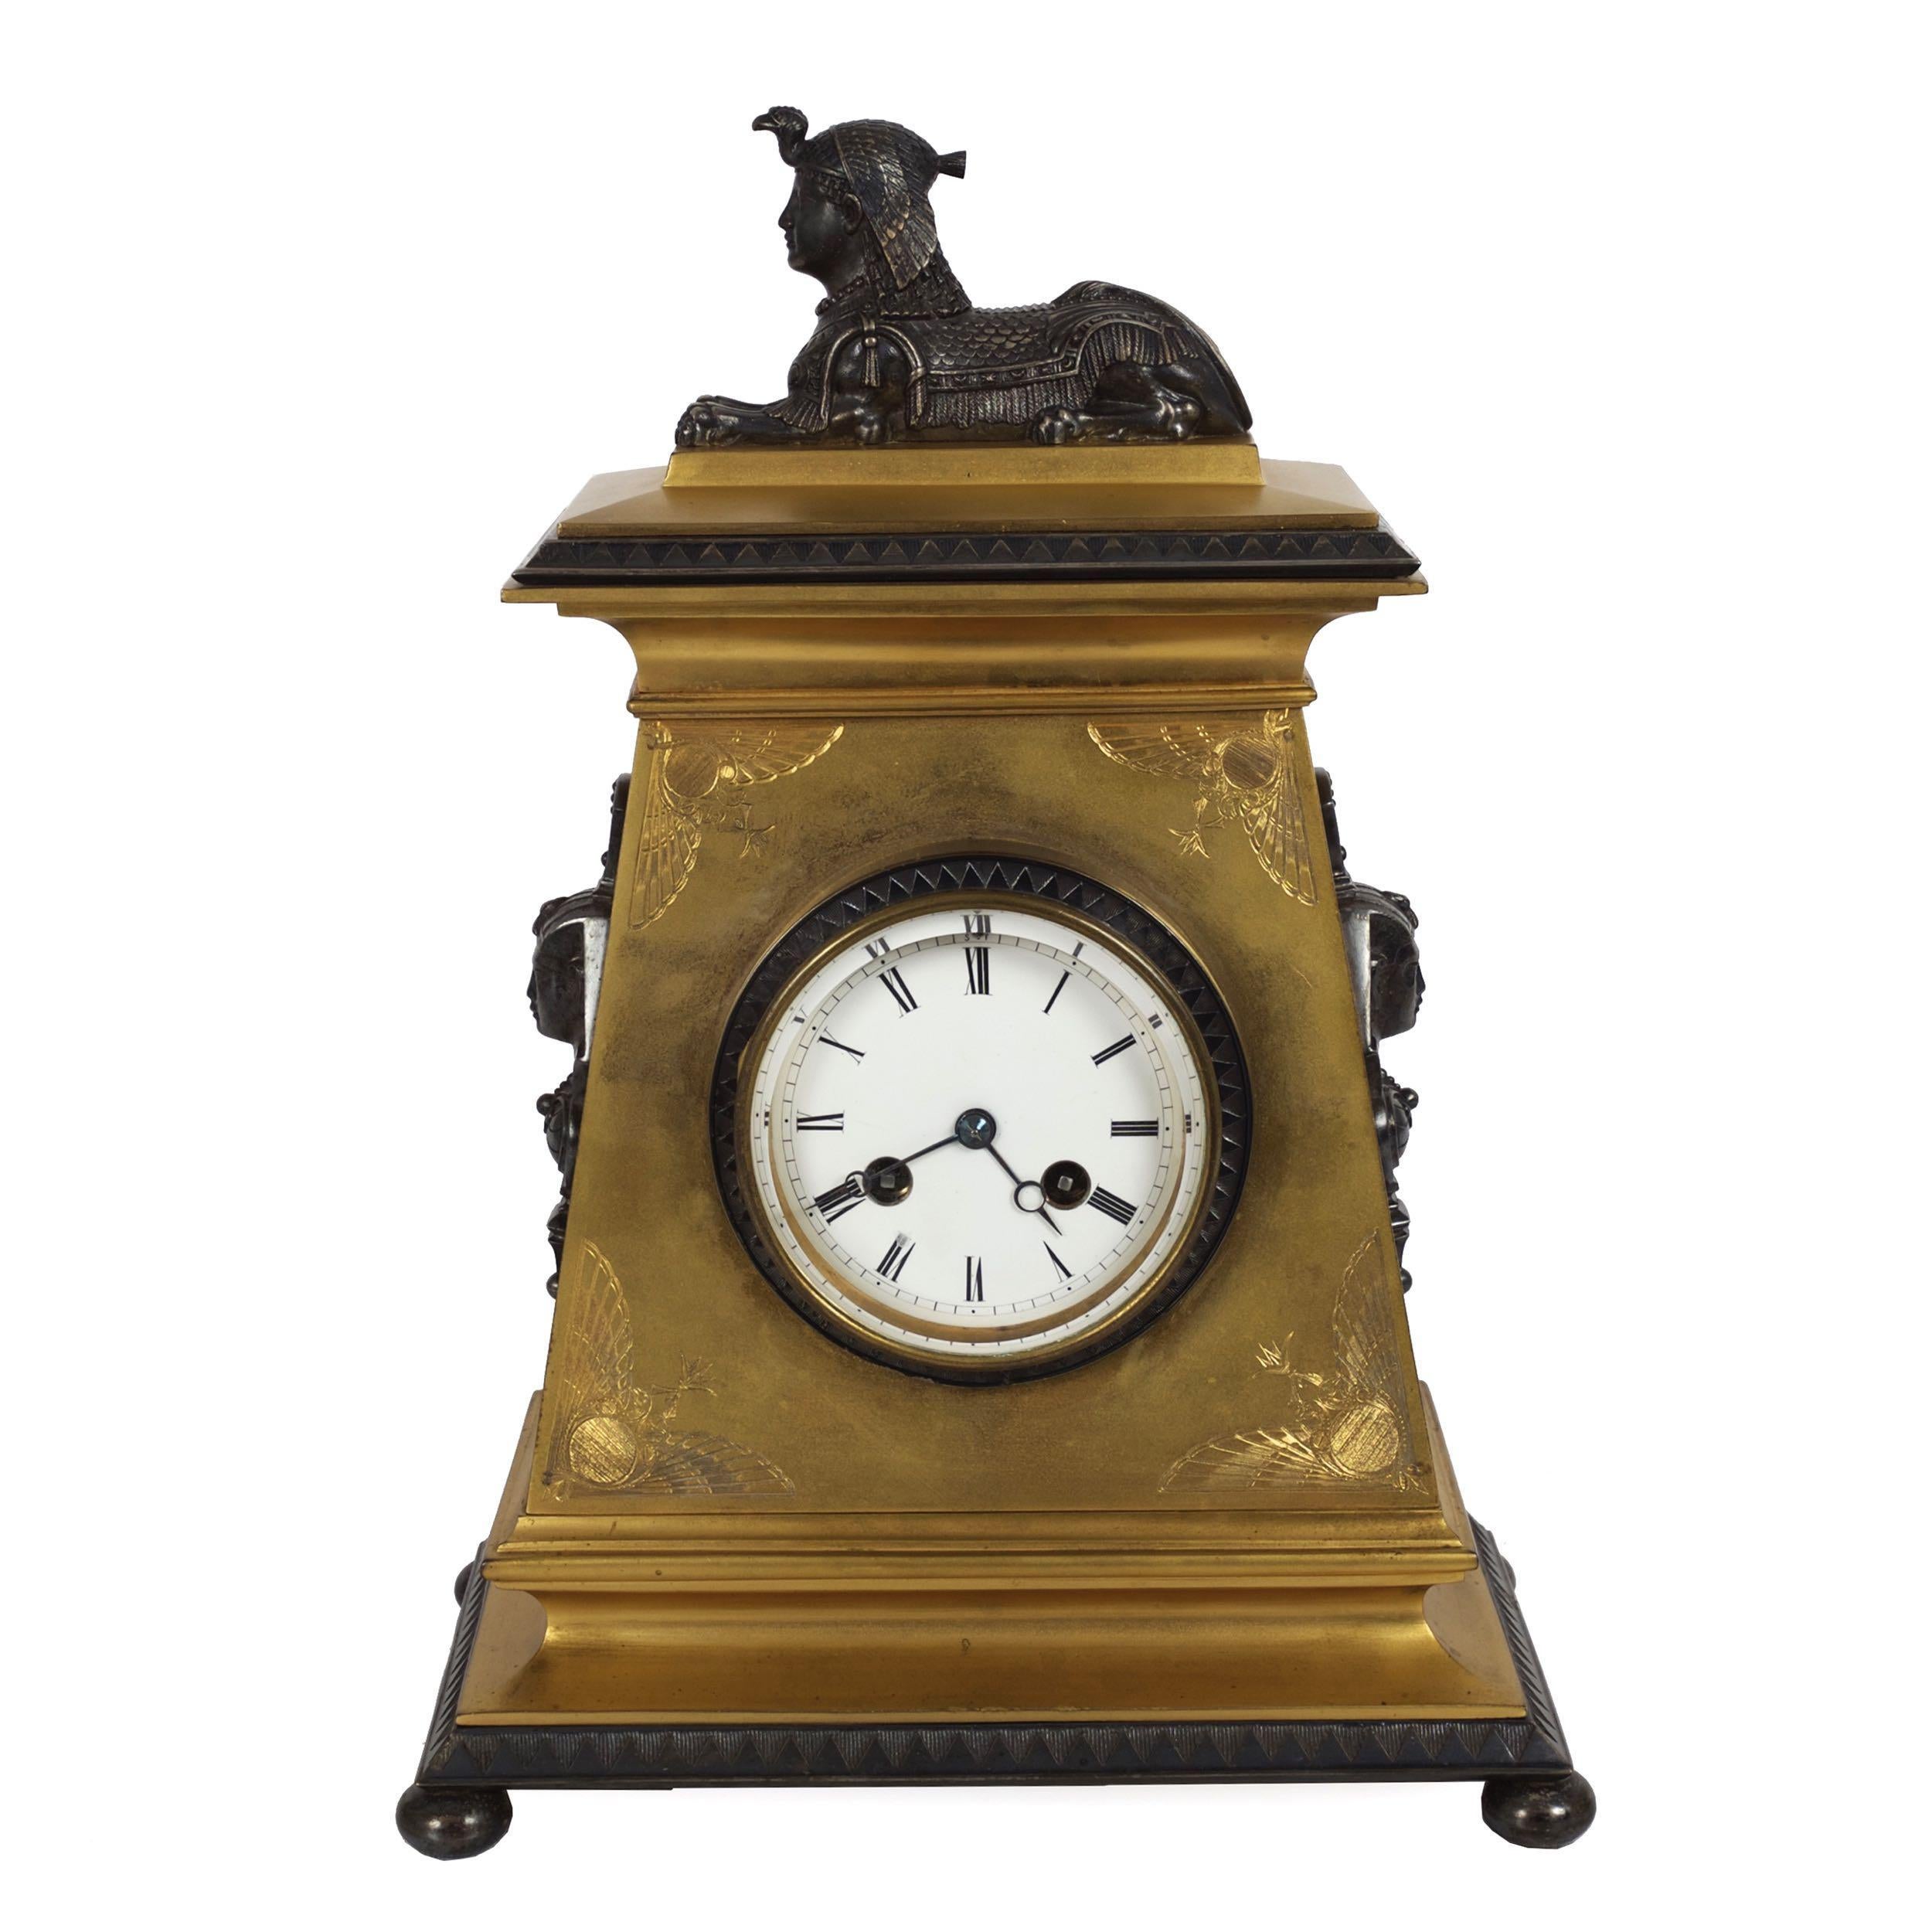 A superb Neo-Egyptian mantel clock characterized by a trapezoidal gilt bronze body with spandrels incised with twin phoenix motifs surmounted by a silver plated bronze seated sphinx and flanked on either side by silver plated Pharaoh masks. The